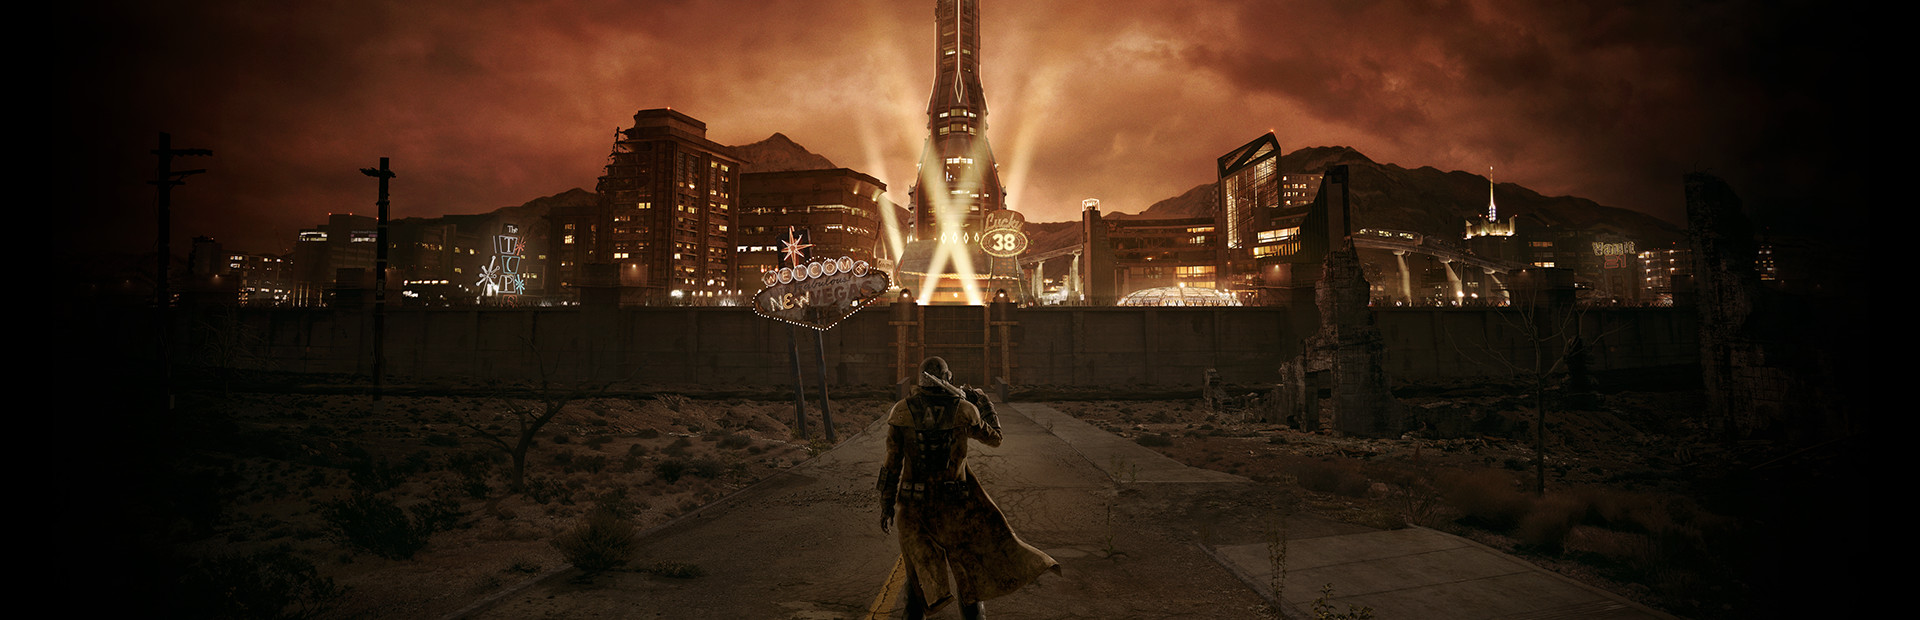 Fallout: New Vegas art approaching the gates of the strip